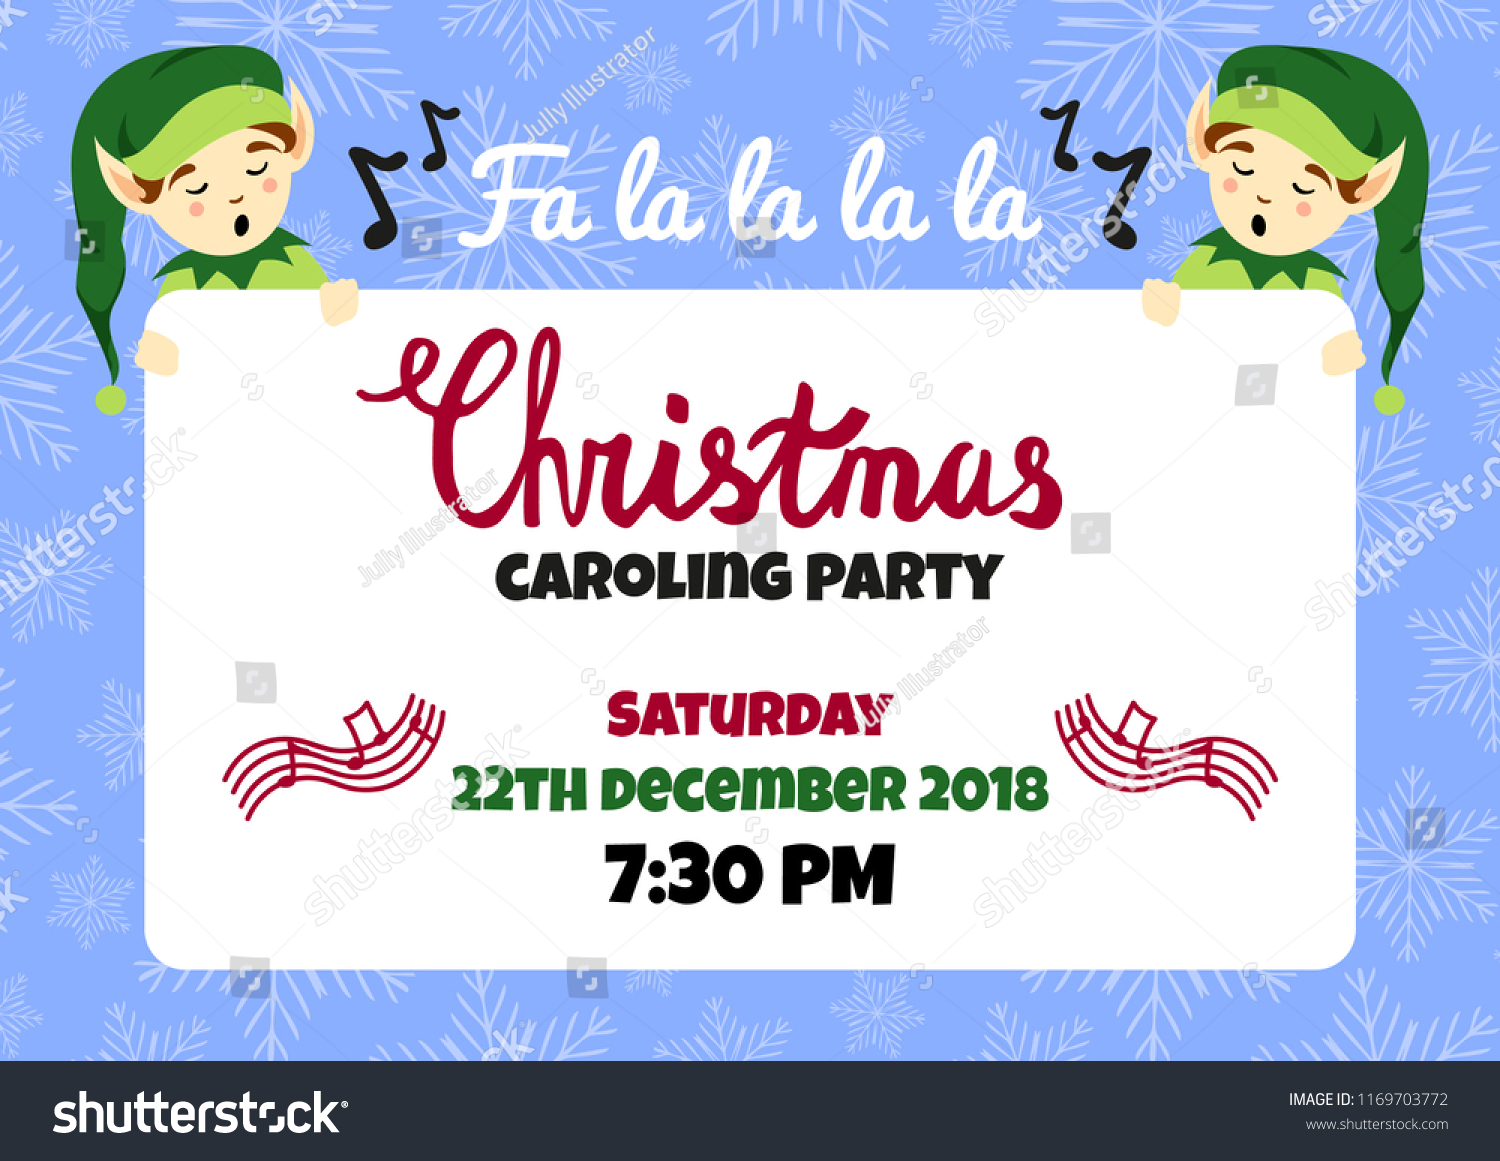 Christmas Caroling Party Poster Flyer Vector Stock Vector Royalty Free 1169703772